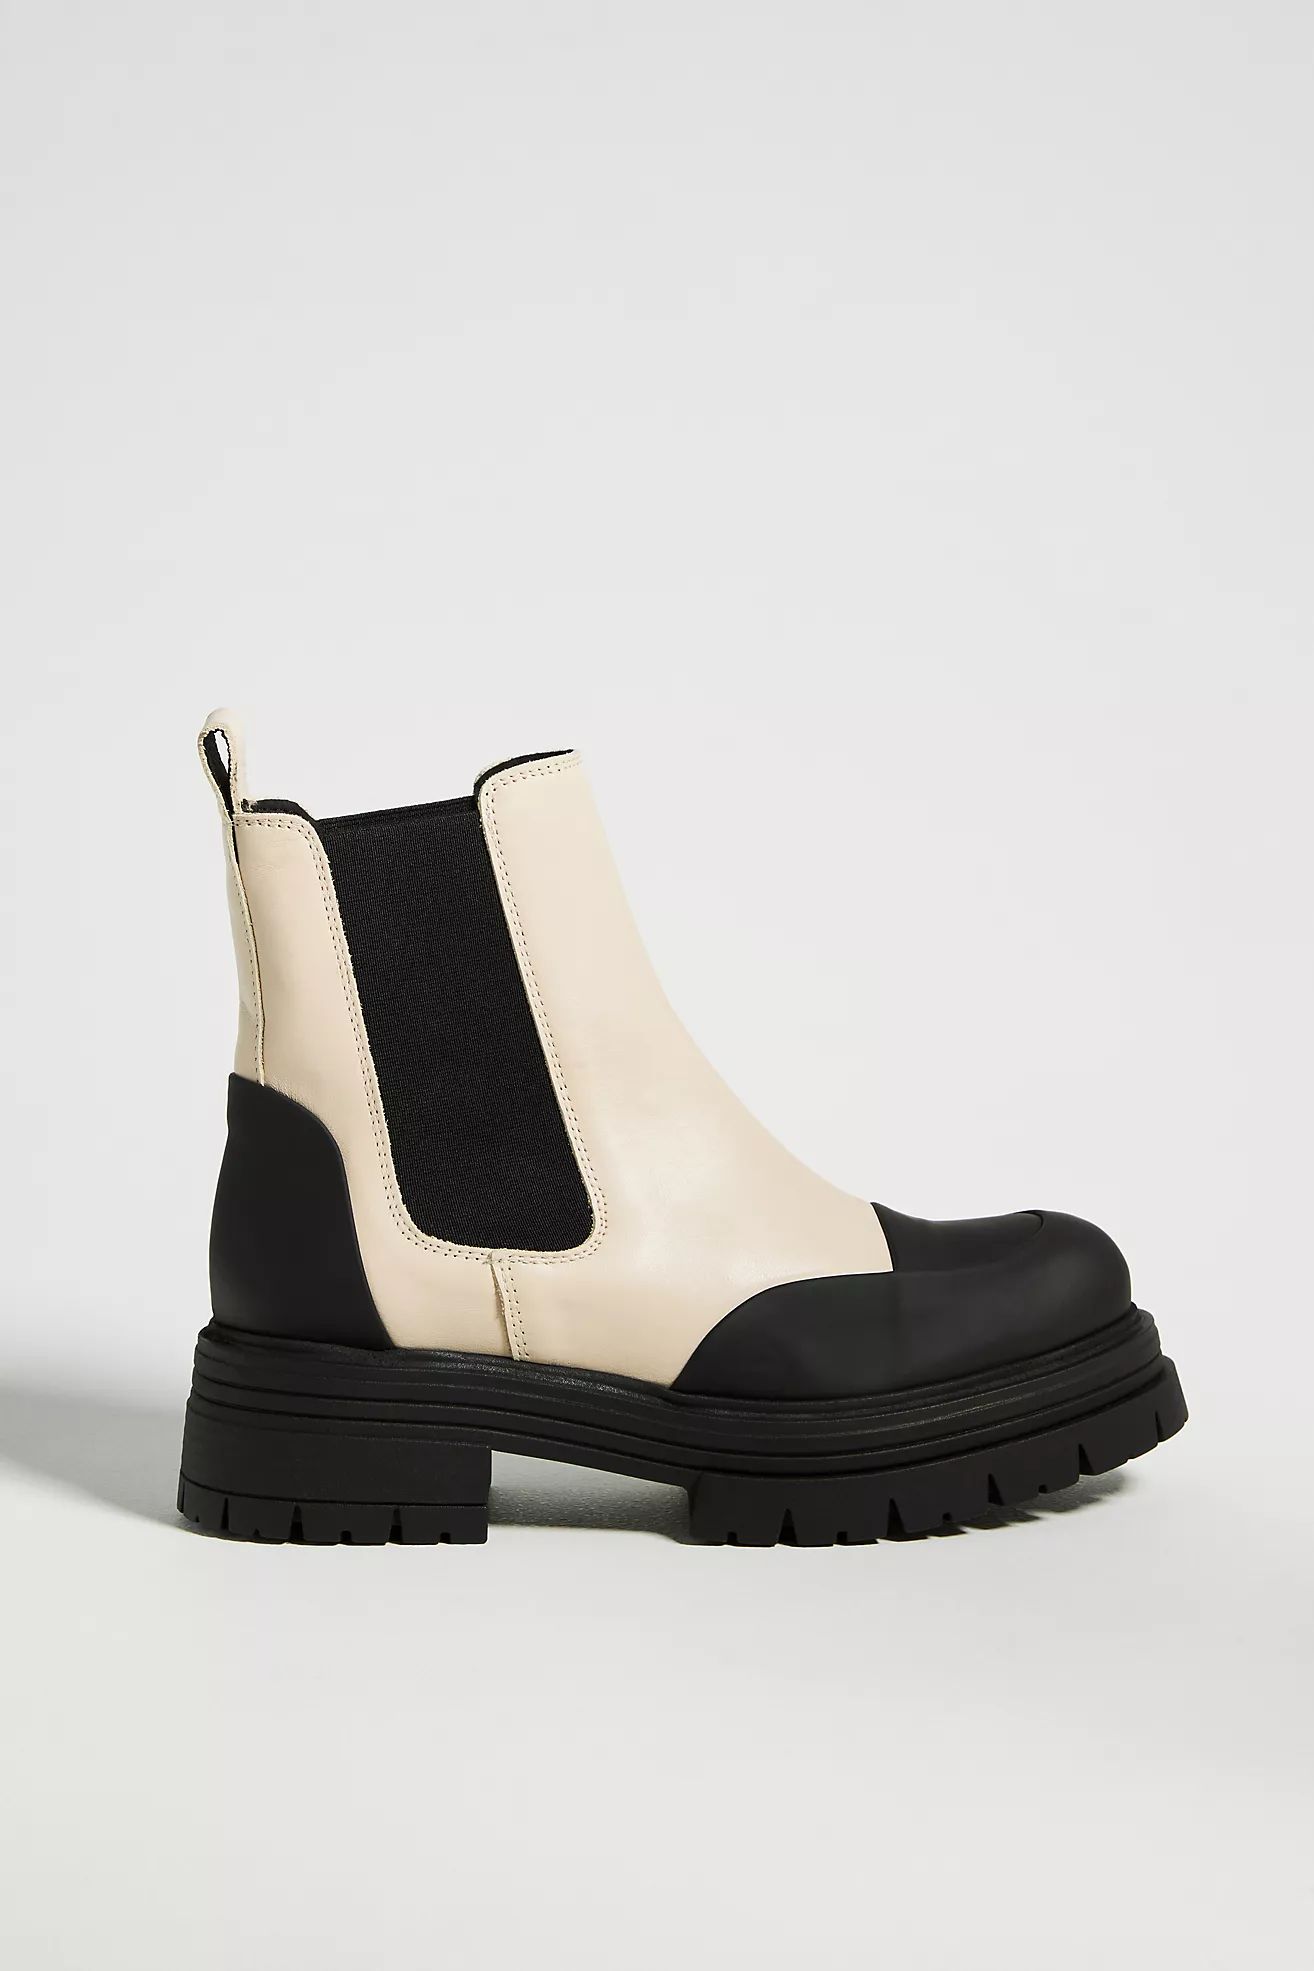 Pilcro Stompy Chelsea Boots | Anthropologie (US)